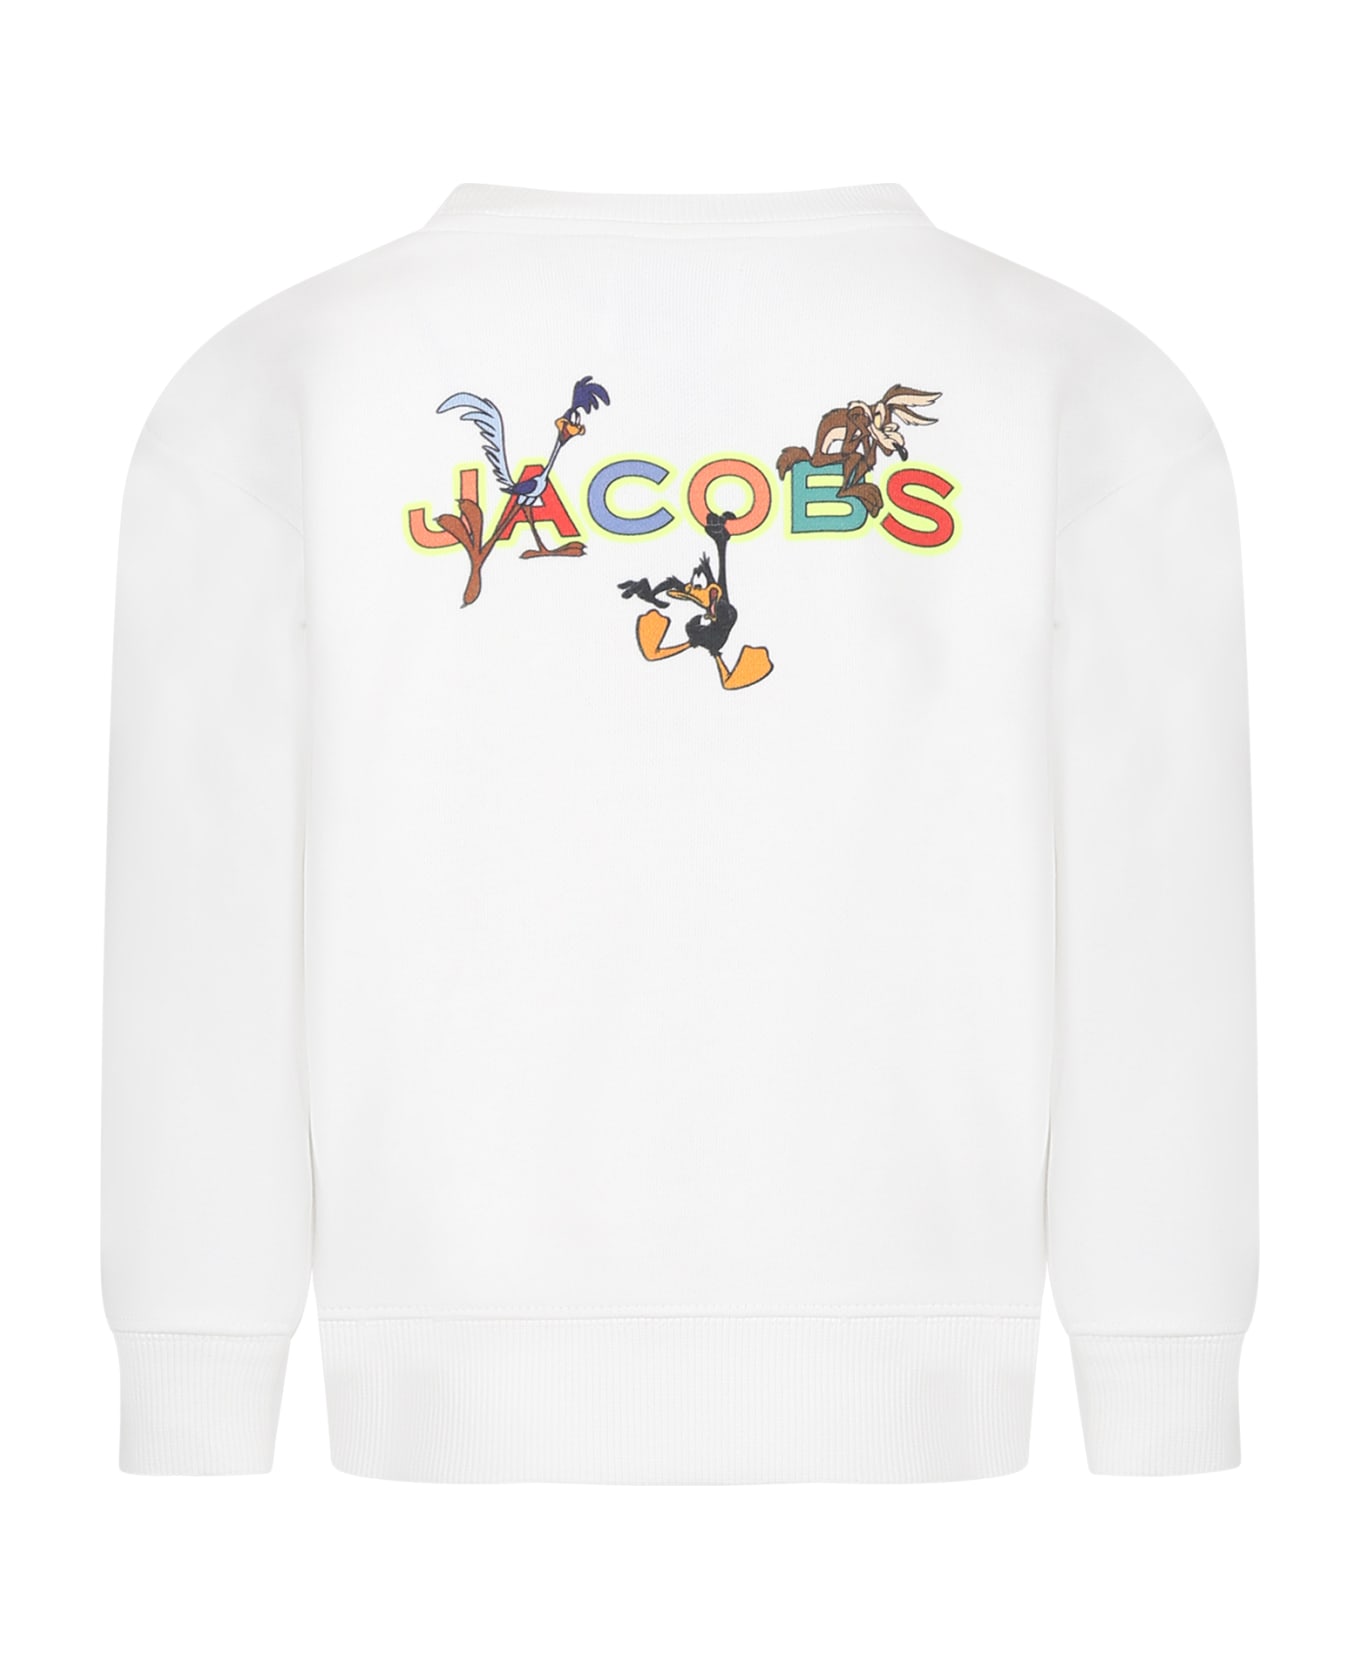 Marc Jacobs White Sweatshirt For Boy With Print And Logo - White